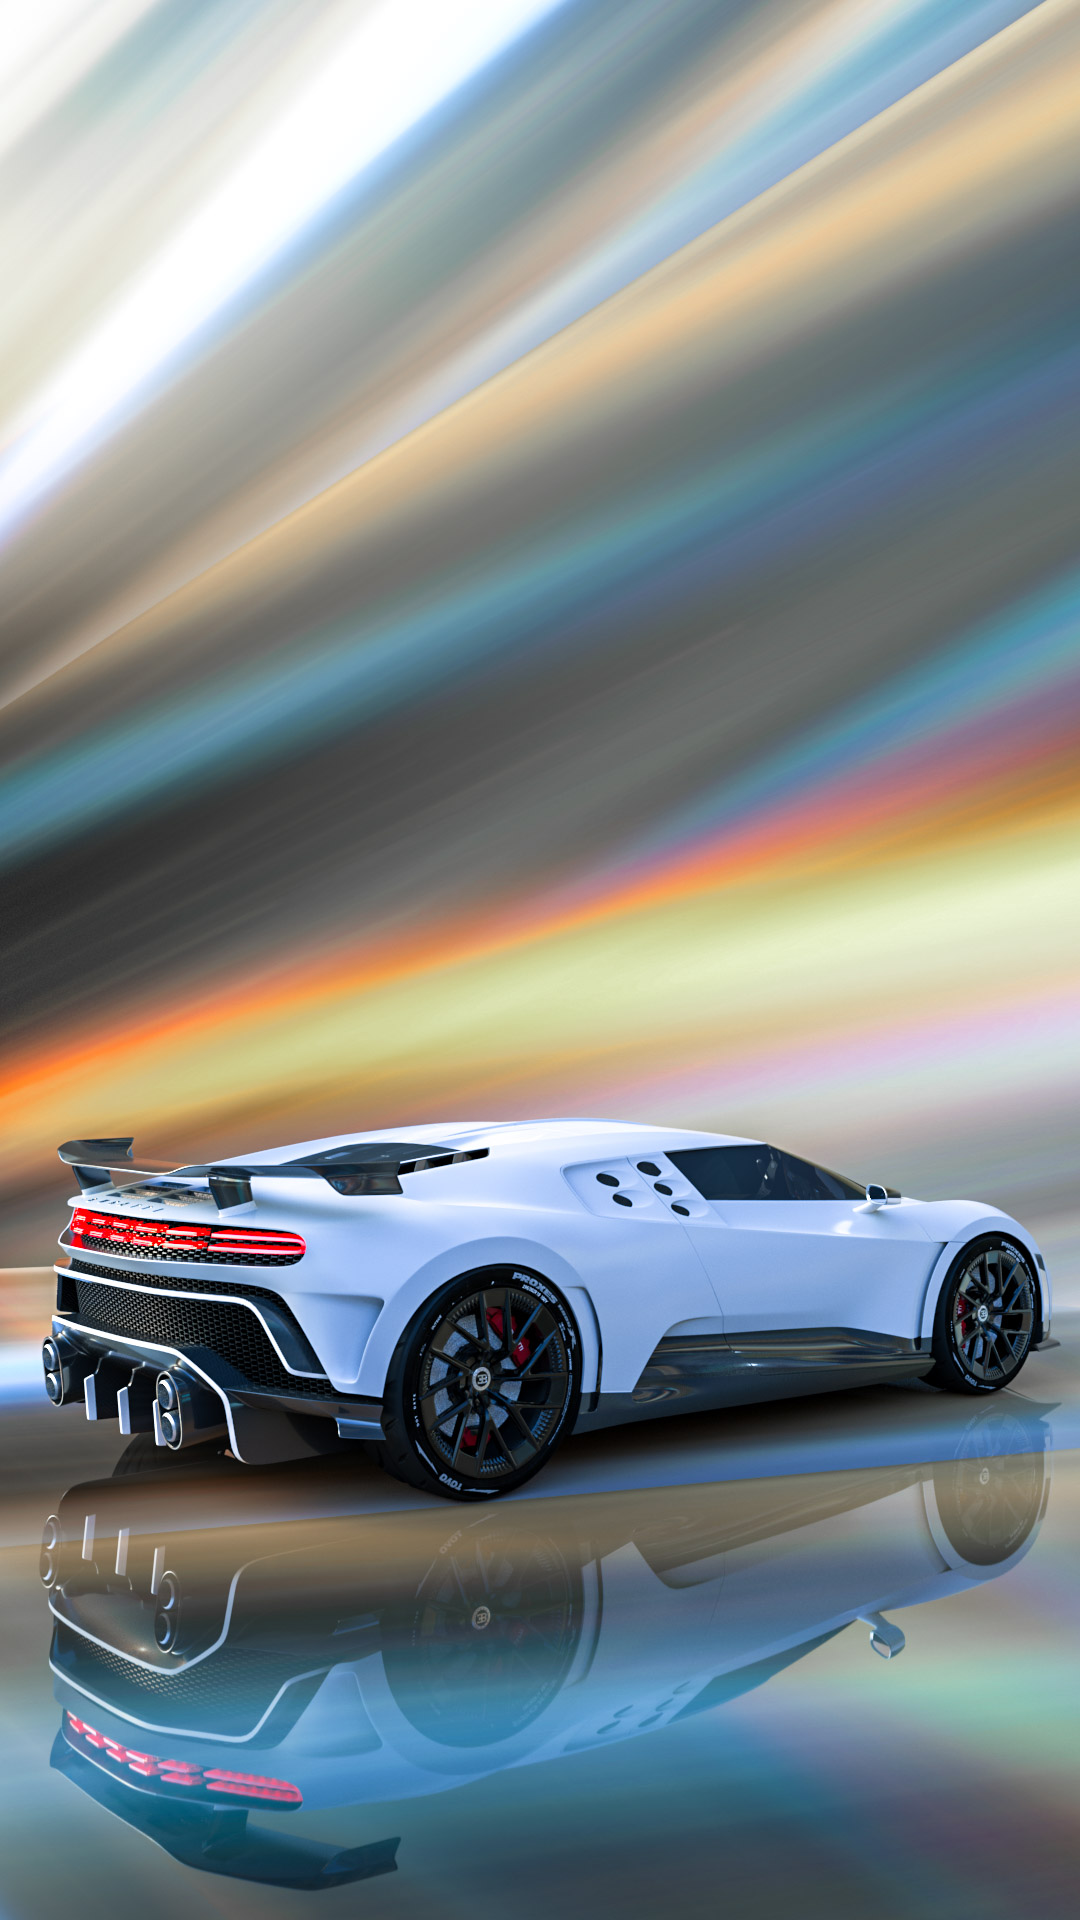 Get mesmerized with the Bugatti Centodieci, a supercar that comes alive in our full HD car wallpaper.